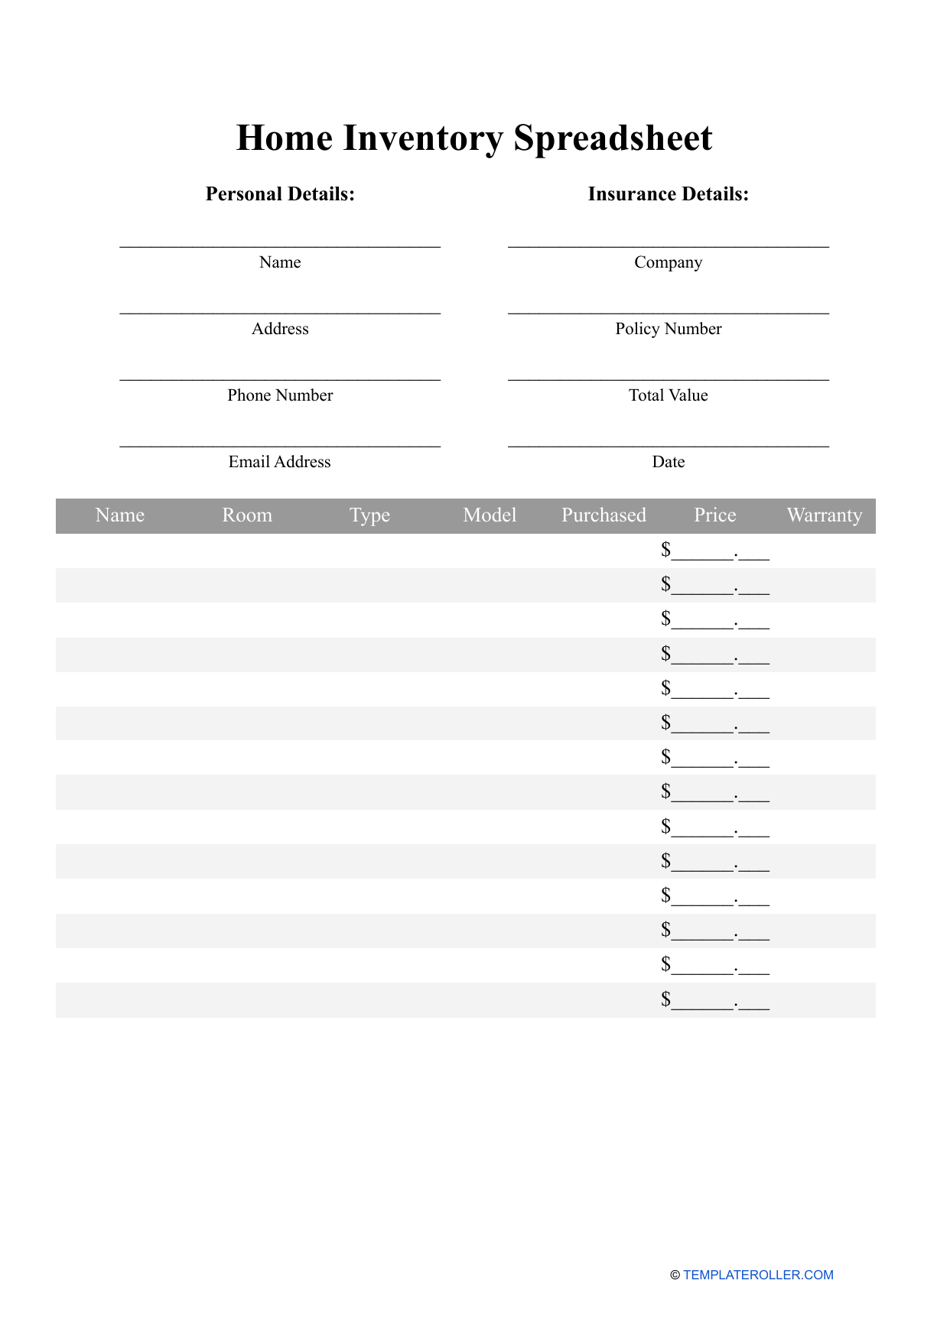 Home Inventory Spreadsheet Template Preview